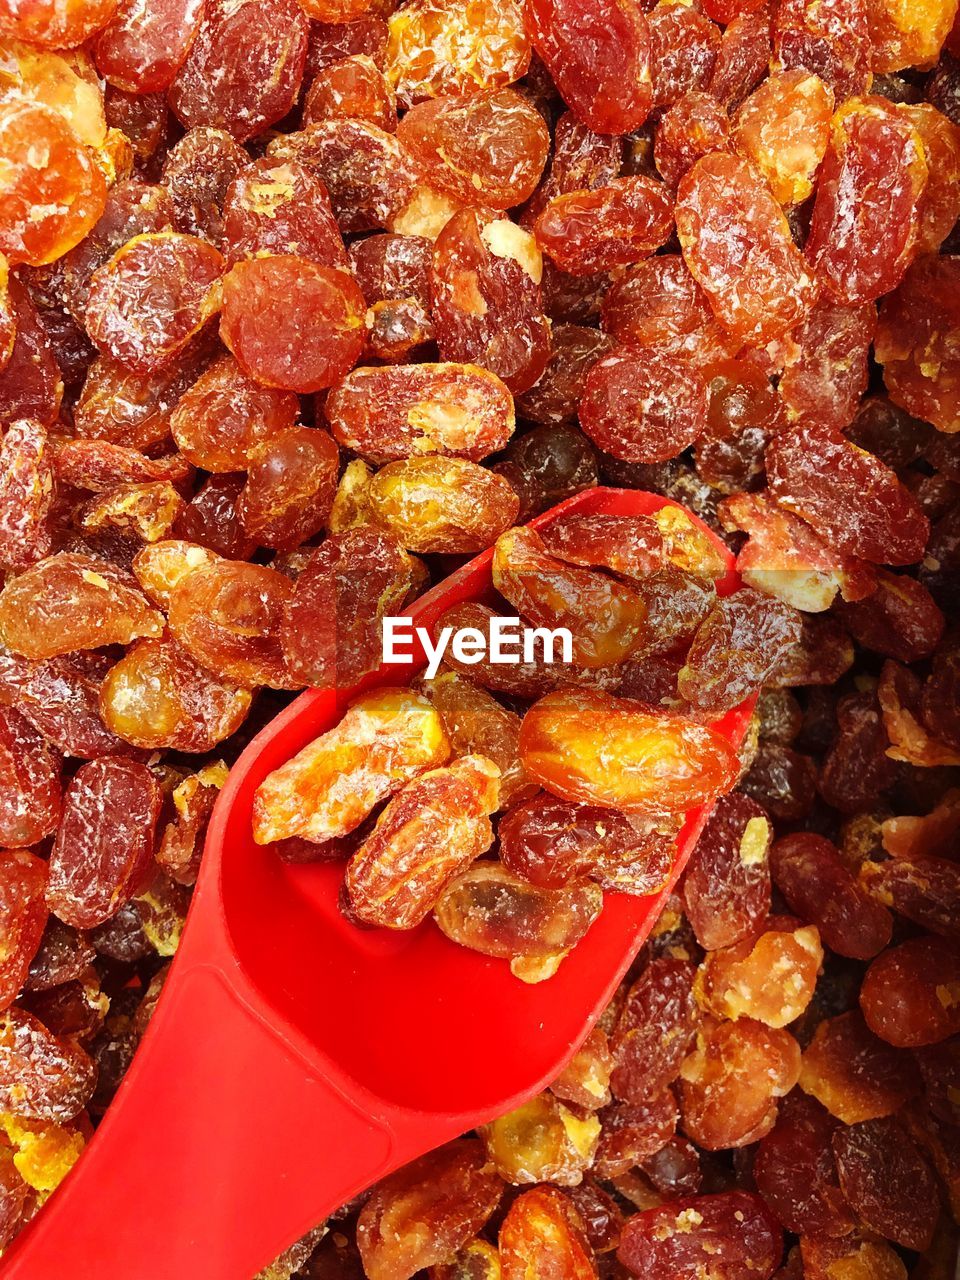 Close-up of red spoon on raisins